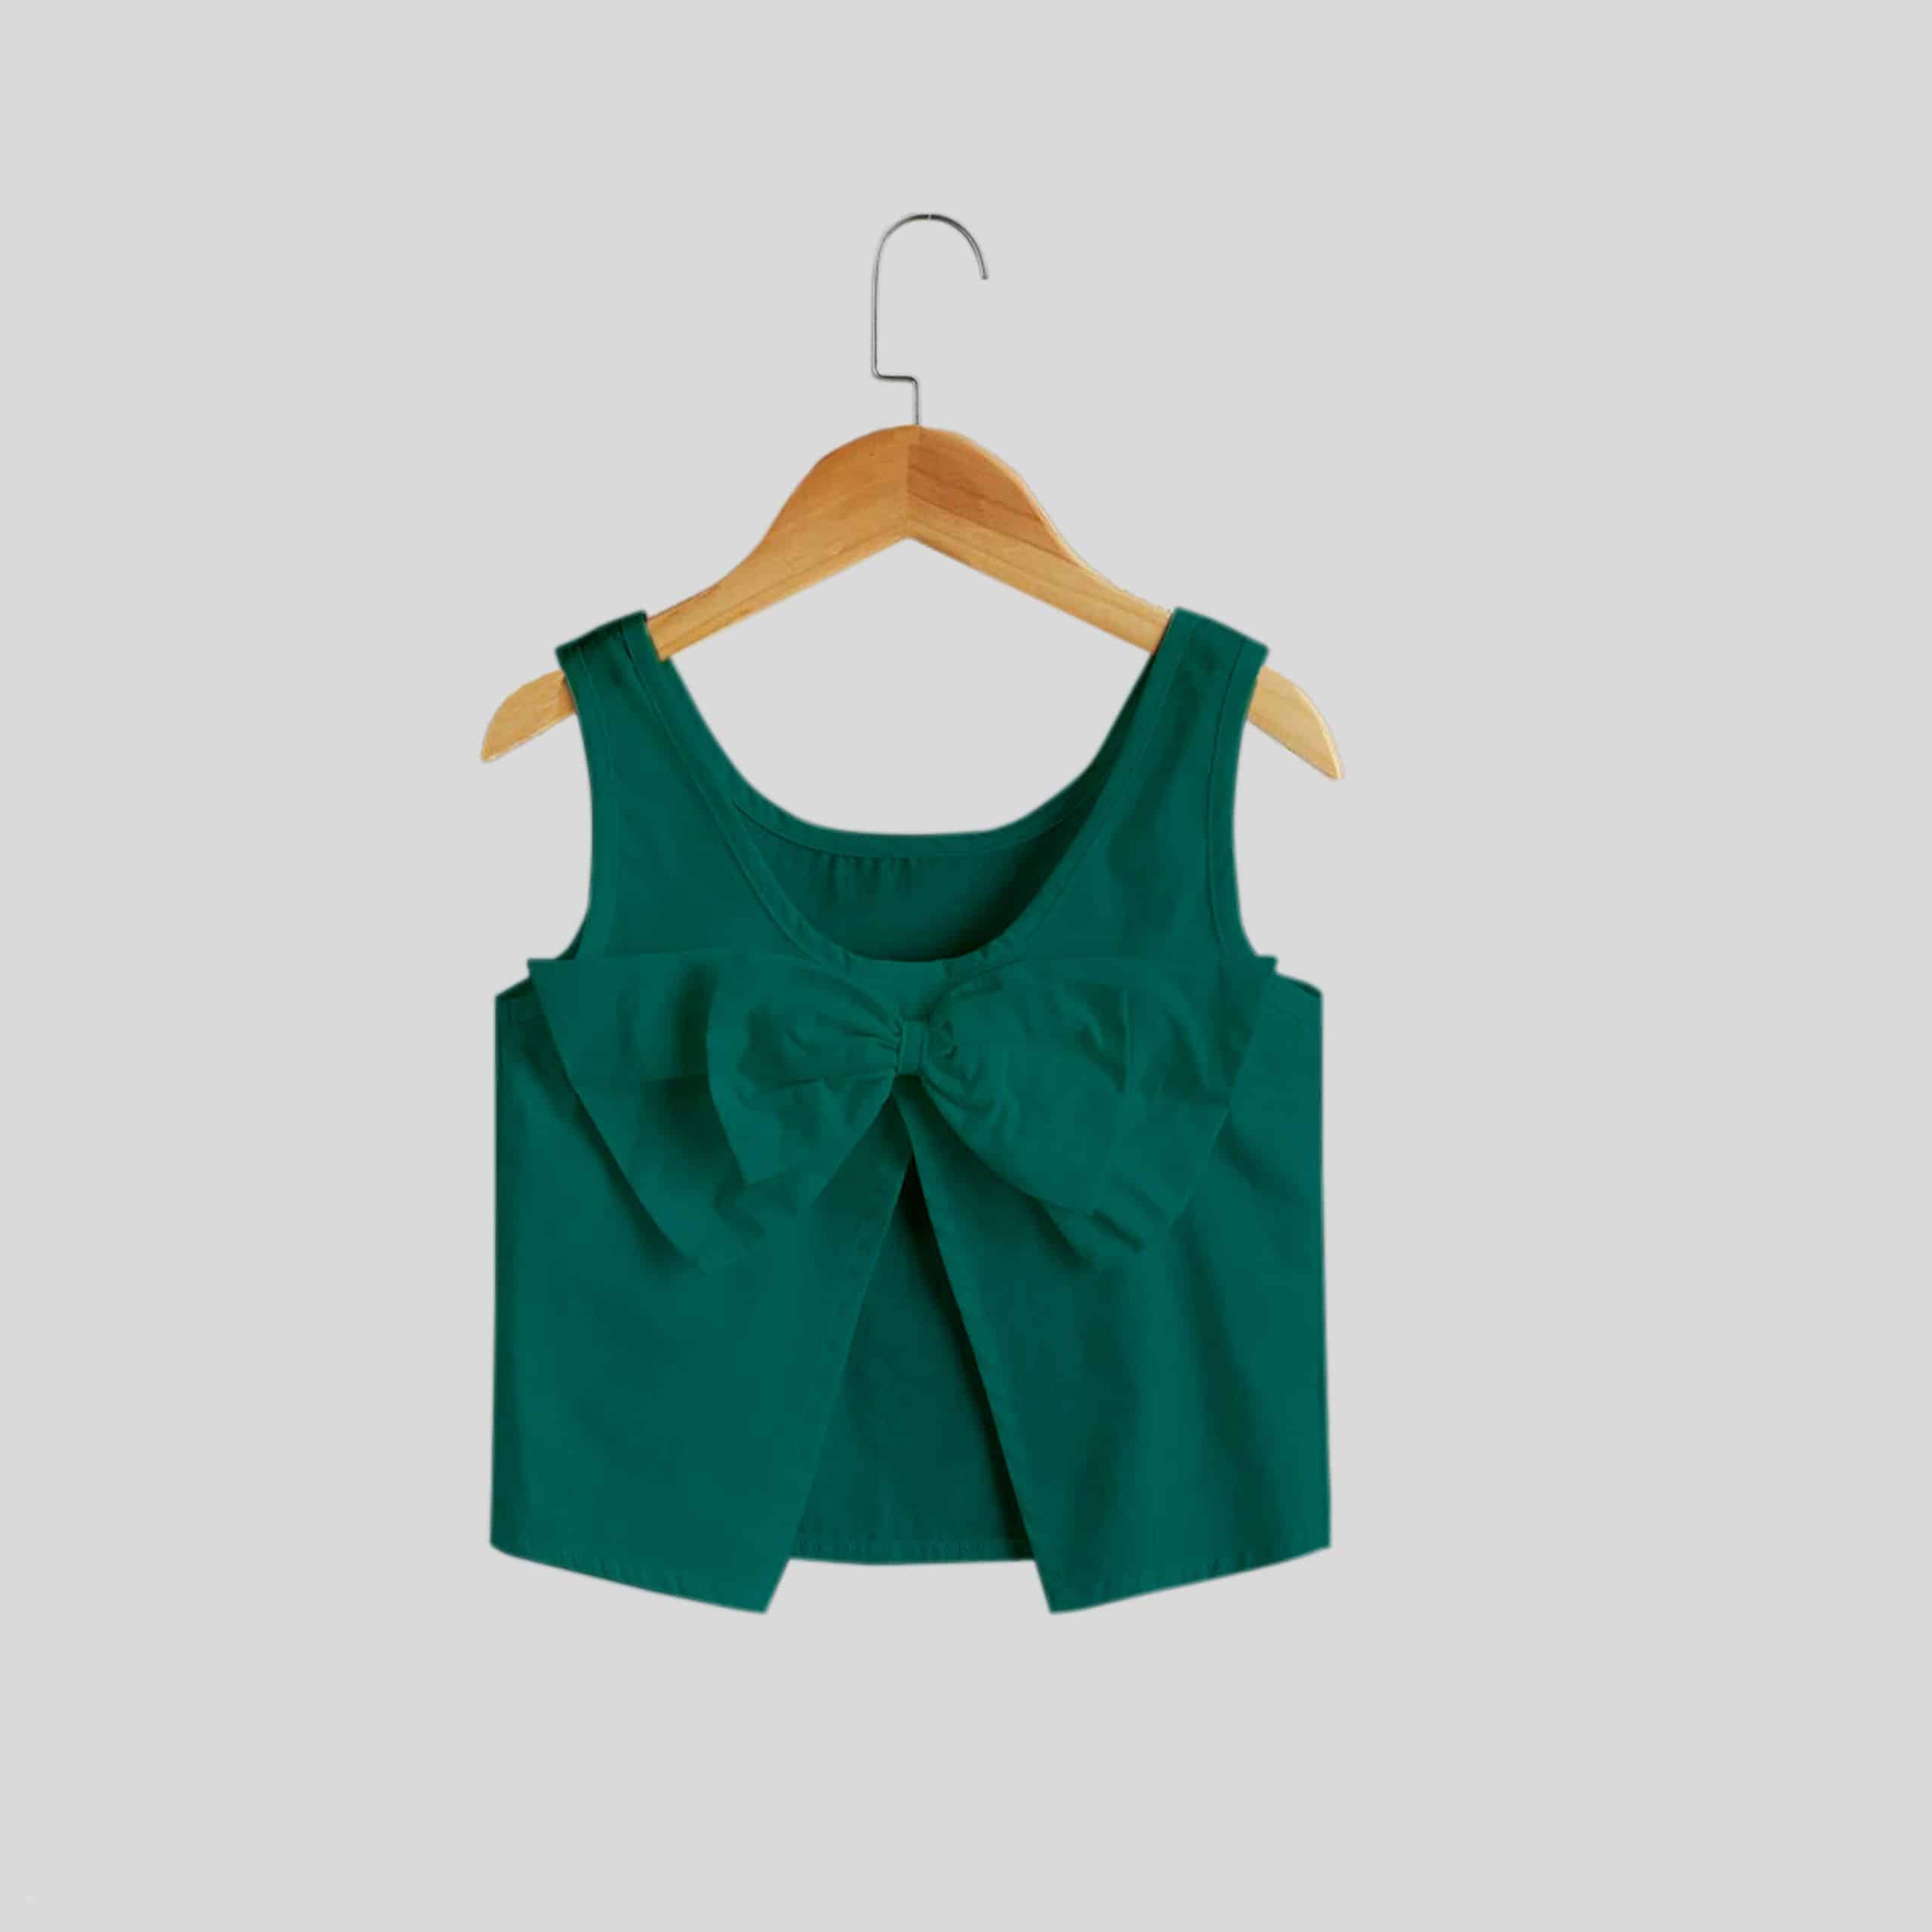 Girls sleeveless green top with cute bow details-RKFCW217